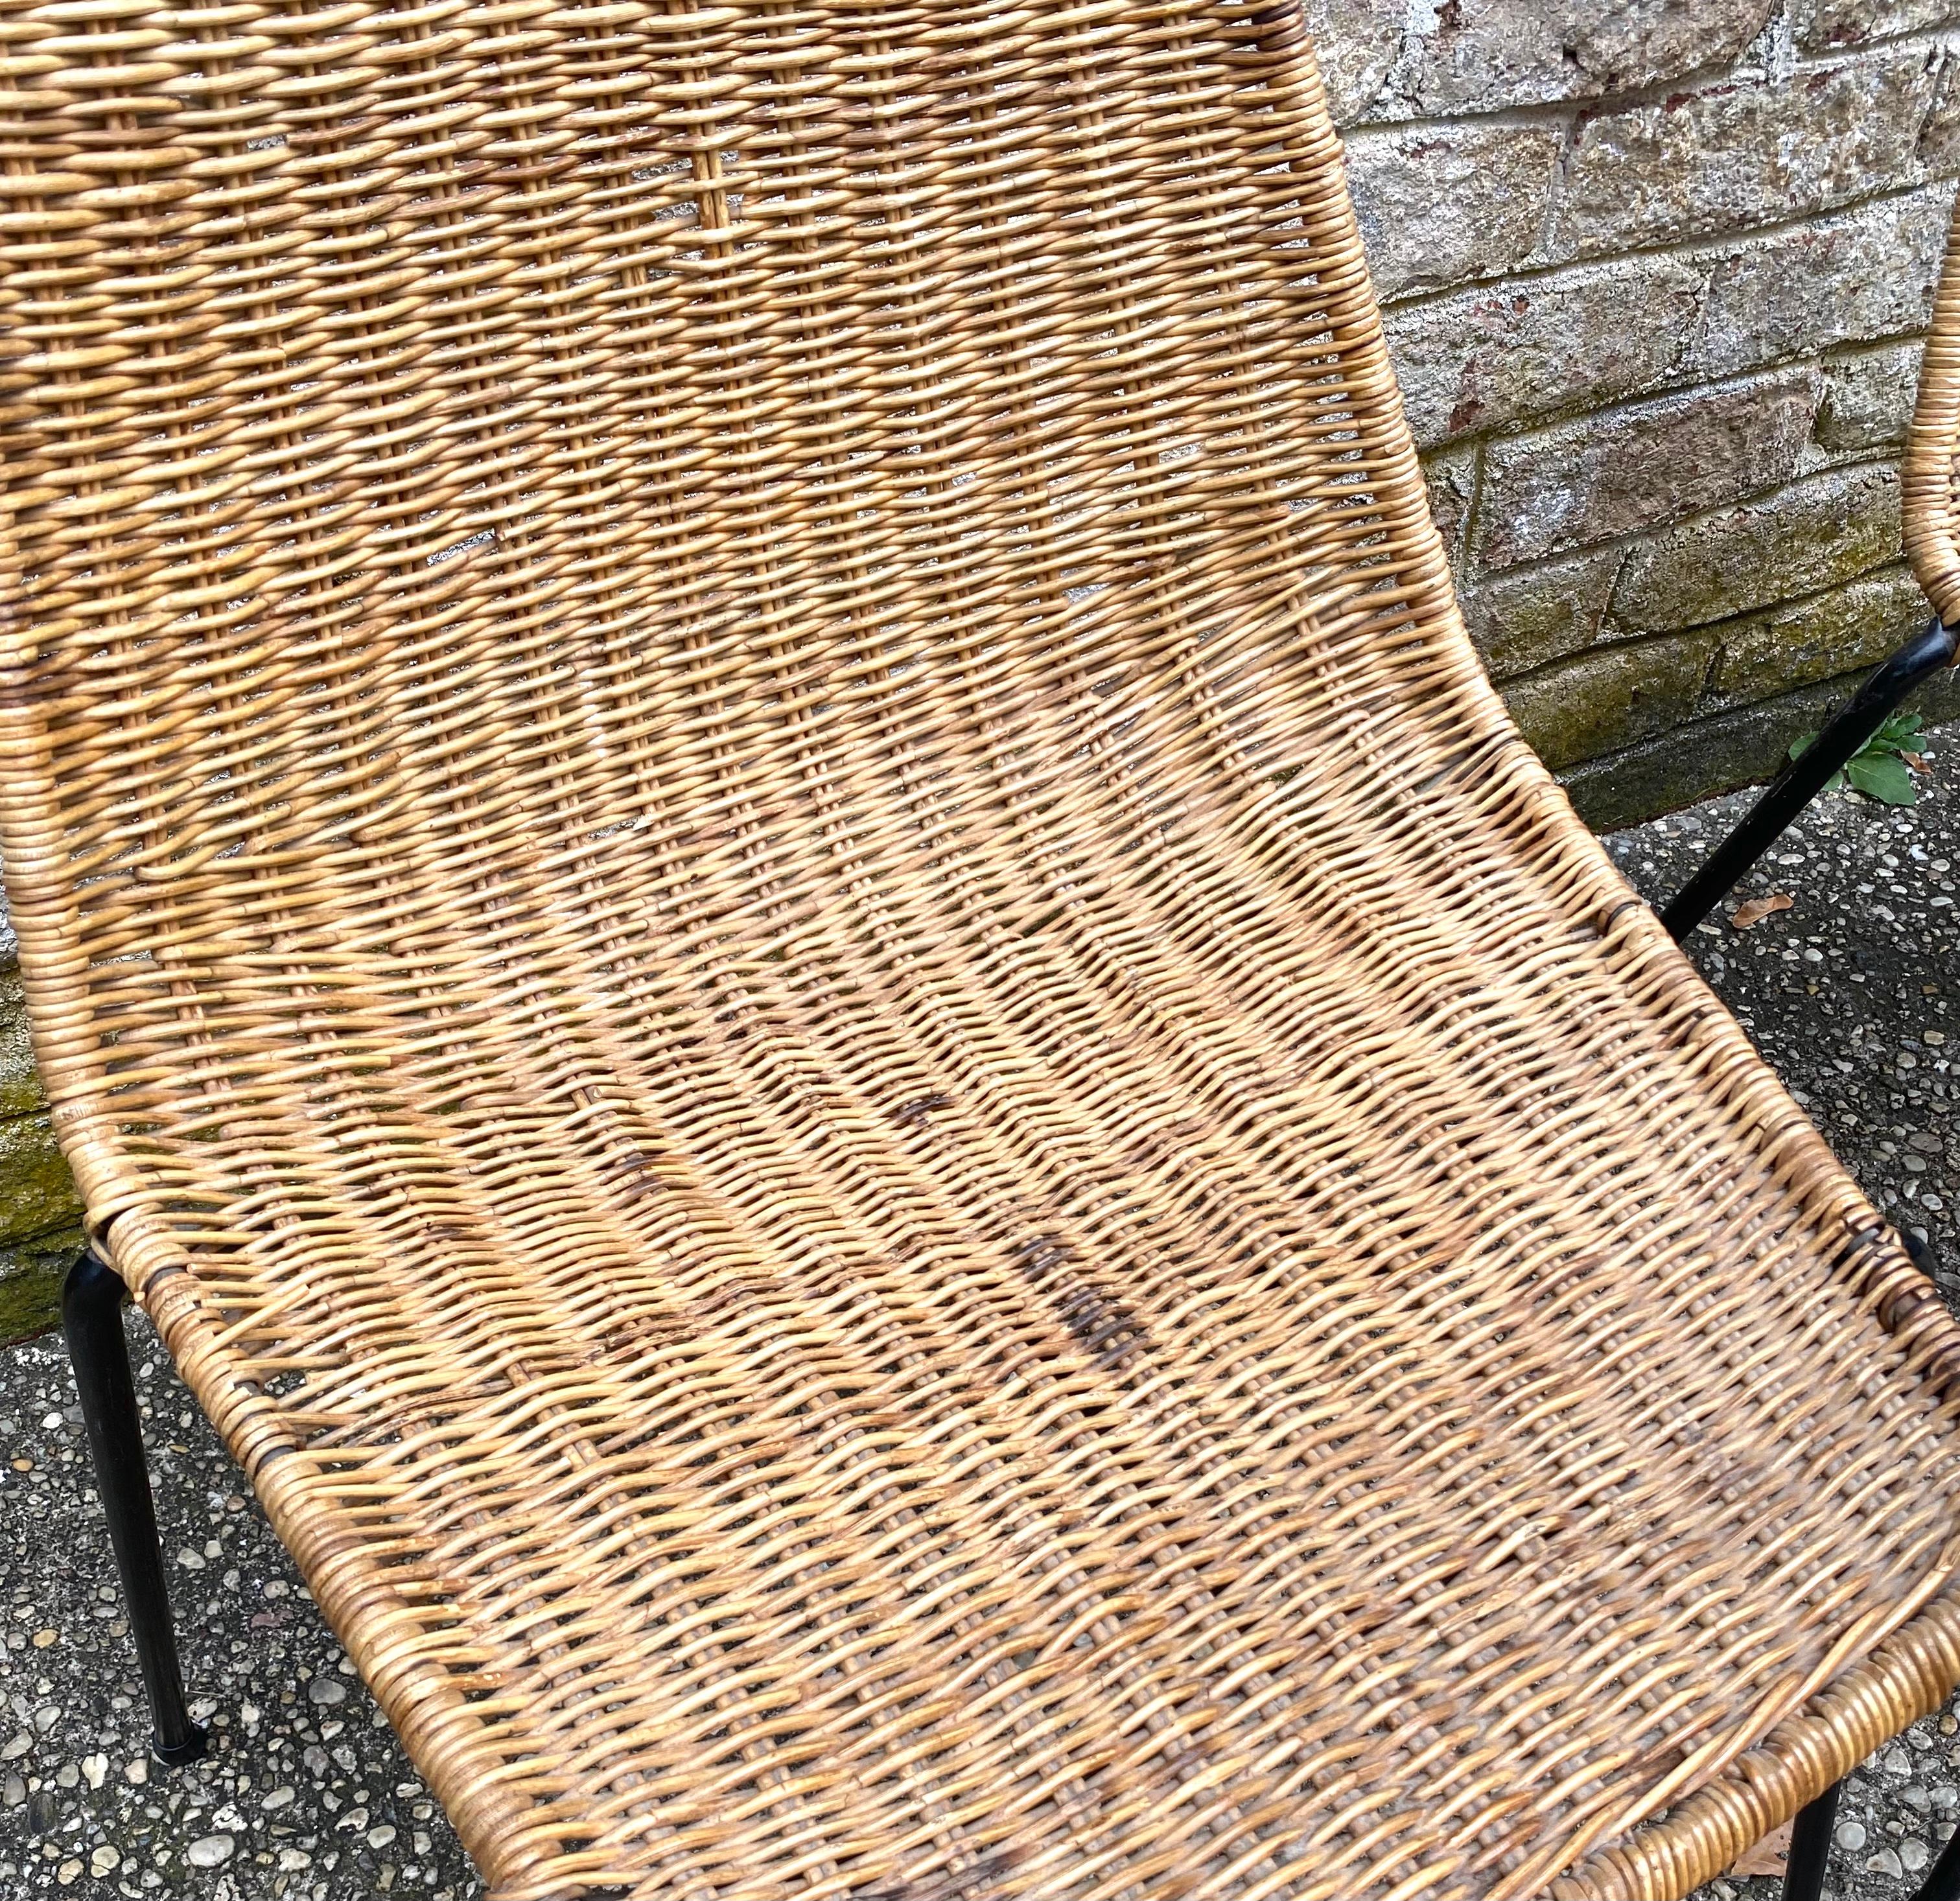 Mid-20th Century Set of 5 Gian Franco Legler Basket Chairs For Sale